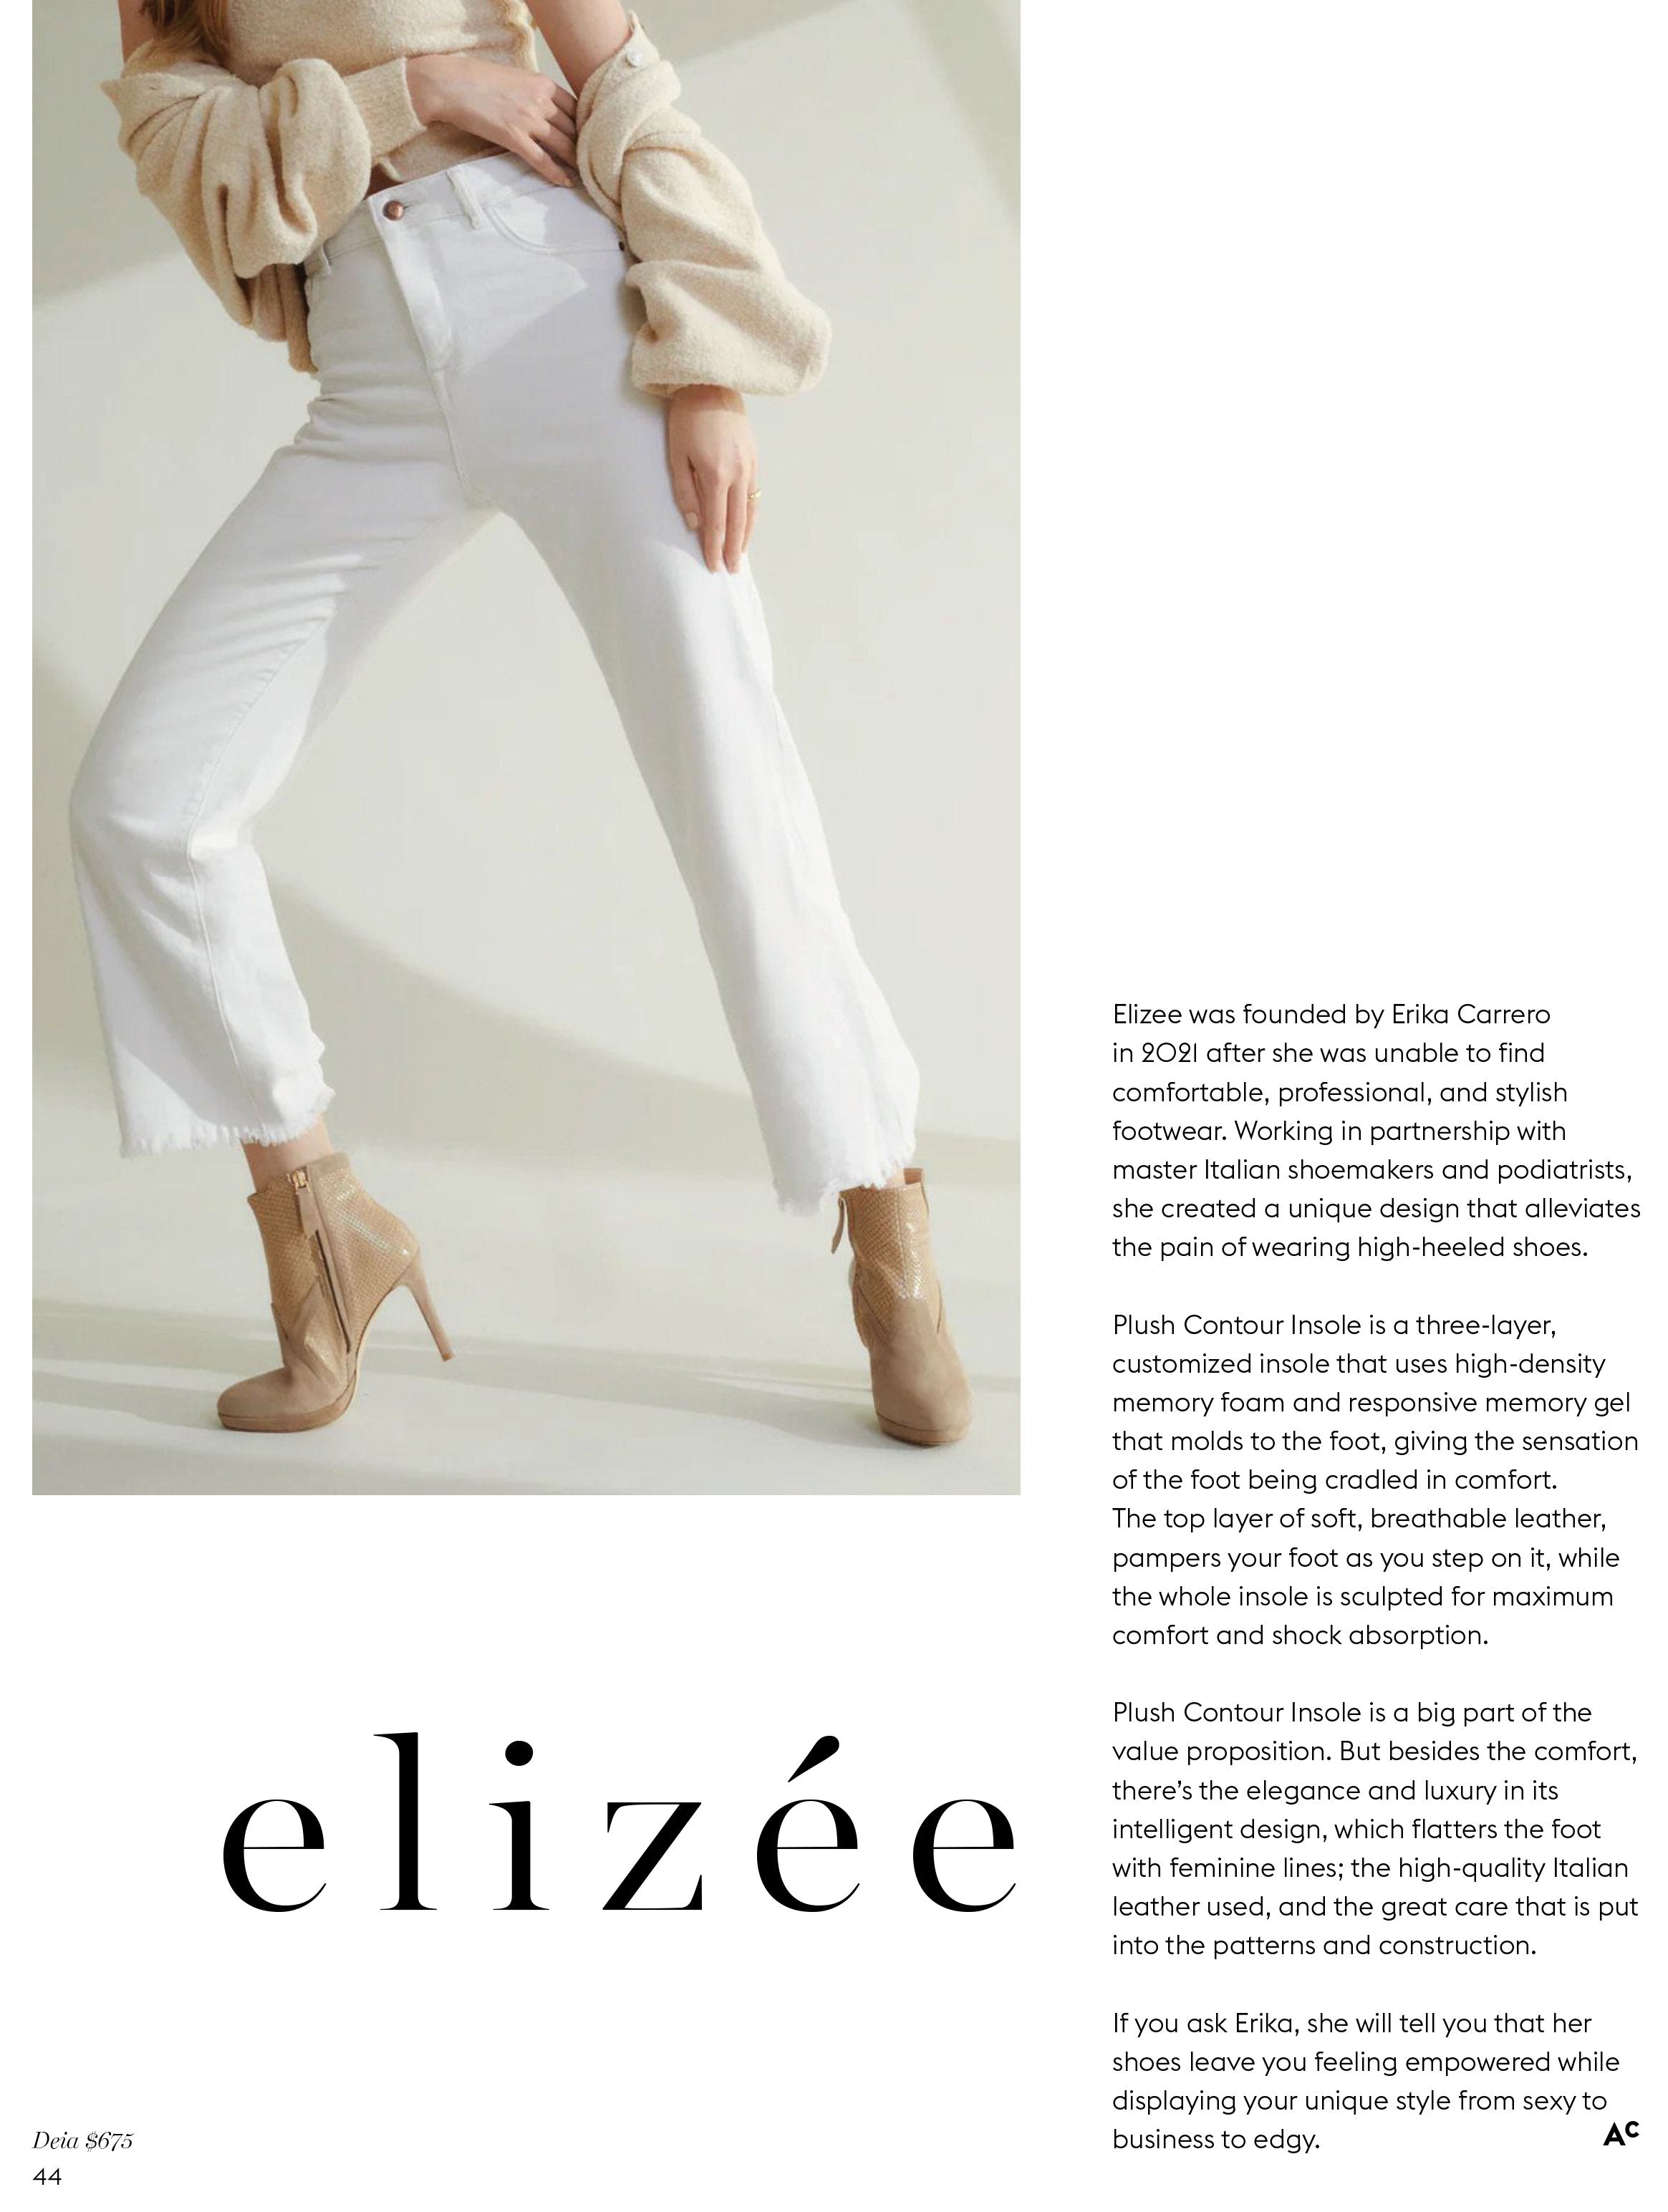 Elizee was founded by Erika Carrero in 2021 after she was unable to find comfortable, professional, and stylish footwear. Working in partnership with master Italian shoemakers and podiatrists, she created a unique design that alleviates the pain of wearing high-heeled shoes. Plush Contour Insole is a three-layer, customized insole that uses high-density memory foam and responsive memory gel that molds to the foot, giving the sensation of the foot being cradled in comfort. The top layer of soft, breathable leather, pampers your foot as you step on it, while the whole insole is sculpted for maximum comfort and shock absorption. Plush Contour Insole is a big part of the value proposition. But besides the comfort, there’s the elegance and luxury in its intelligent design, which flatters the foot with feminine lines; the high-quality Italian leather used, and the great care that is put into the patterns and construction. If you ask Erika, she will tell you that her shoes leave you feeling empowered while displaying your unique style from sexy to business to edgy.